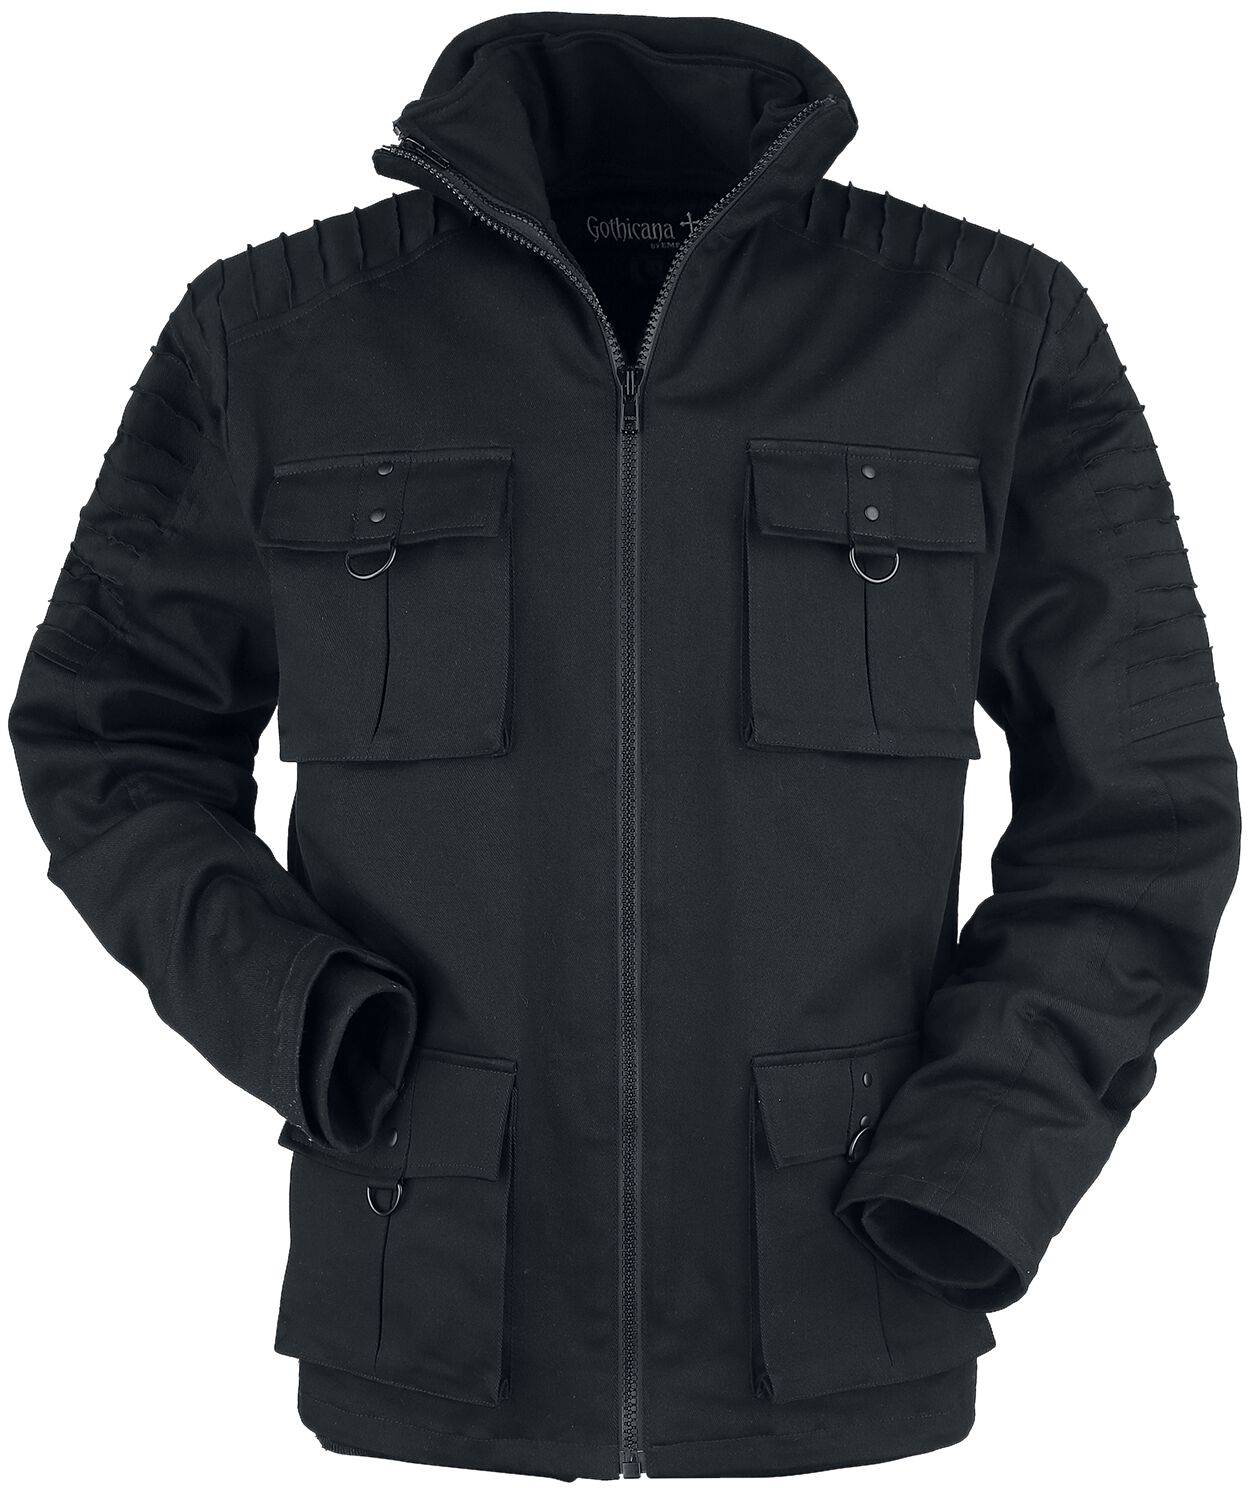 Image of Giacca invernale Gothic di Gothicana by EMP - Winter jacket with flap pockets decorative seams - S a XXL - Uomo - nero